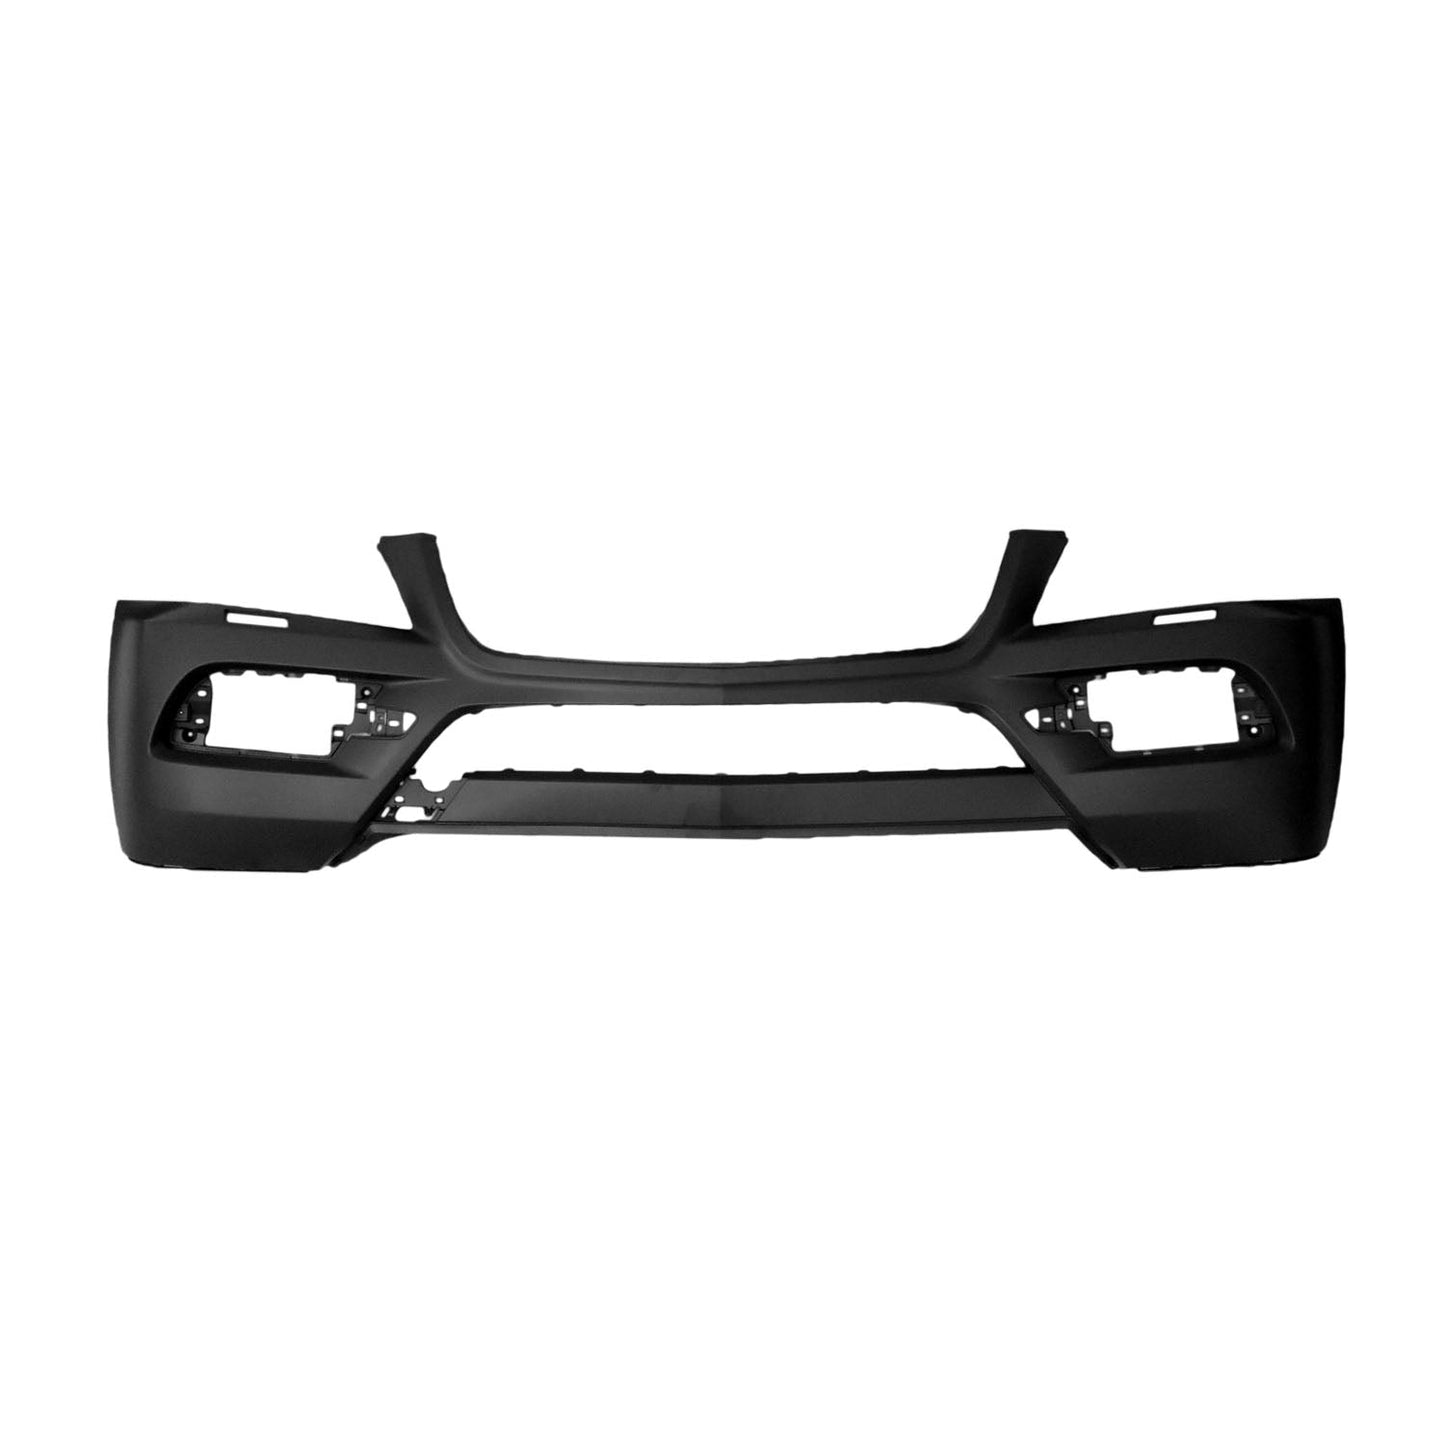 1000 | 2010-2012 MERCEDES-BENZ GL450 Front bumper cover X164; w/o Parktronic; prime | MB1000487|16488503389999